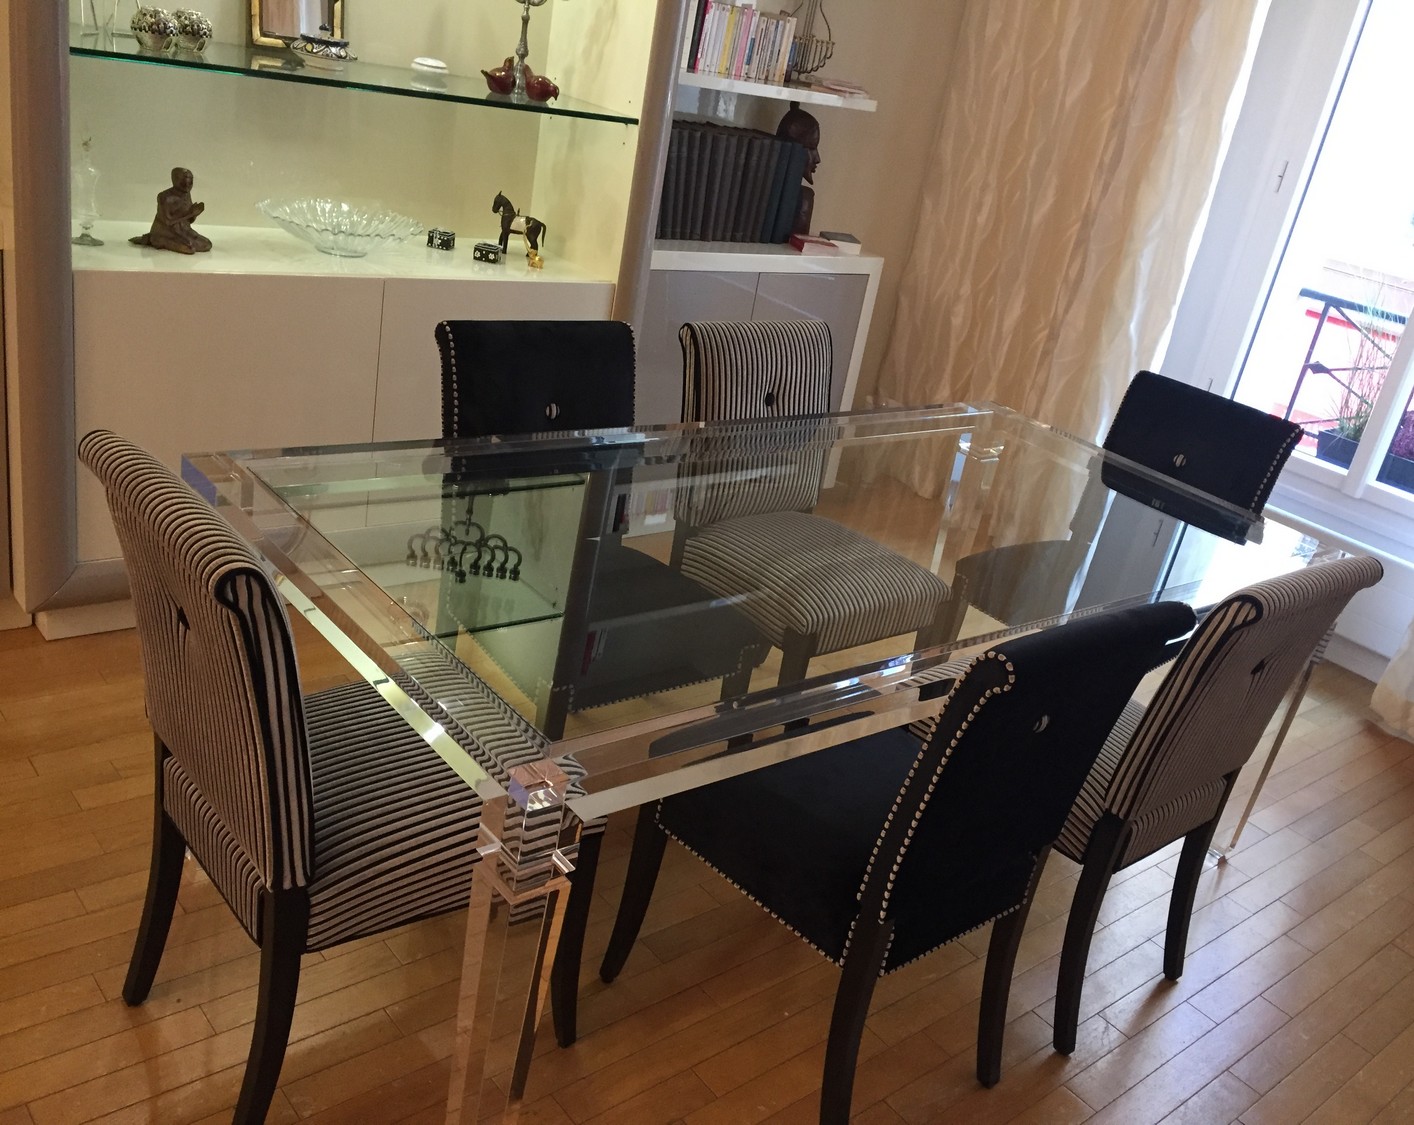 Transparent dining table